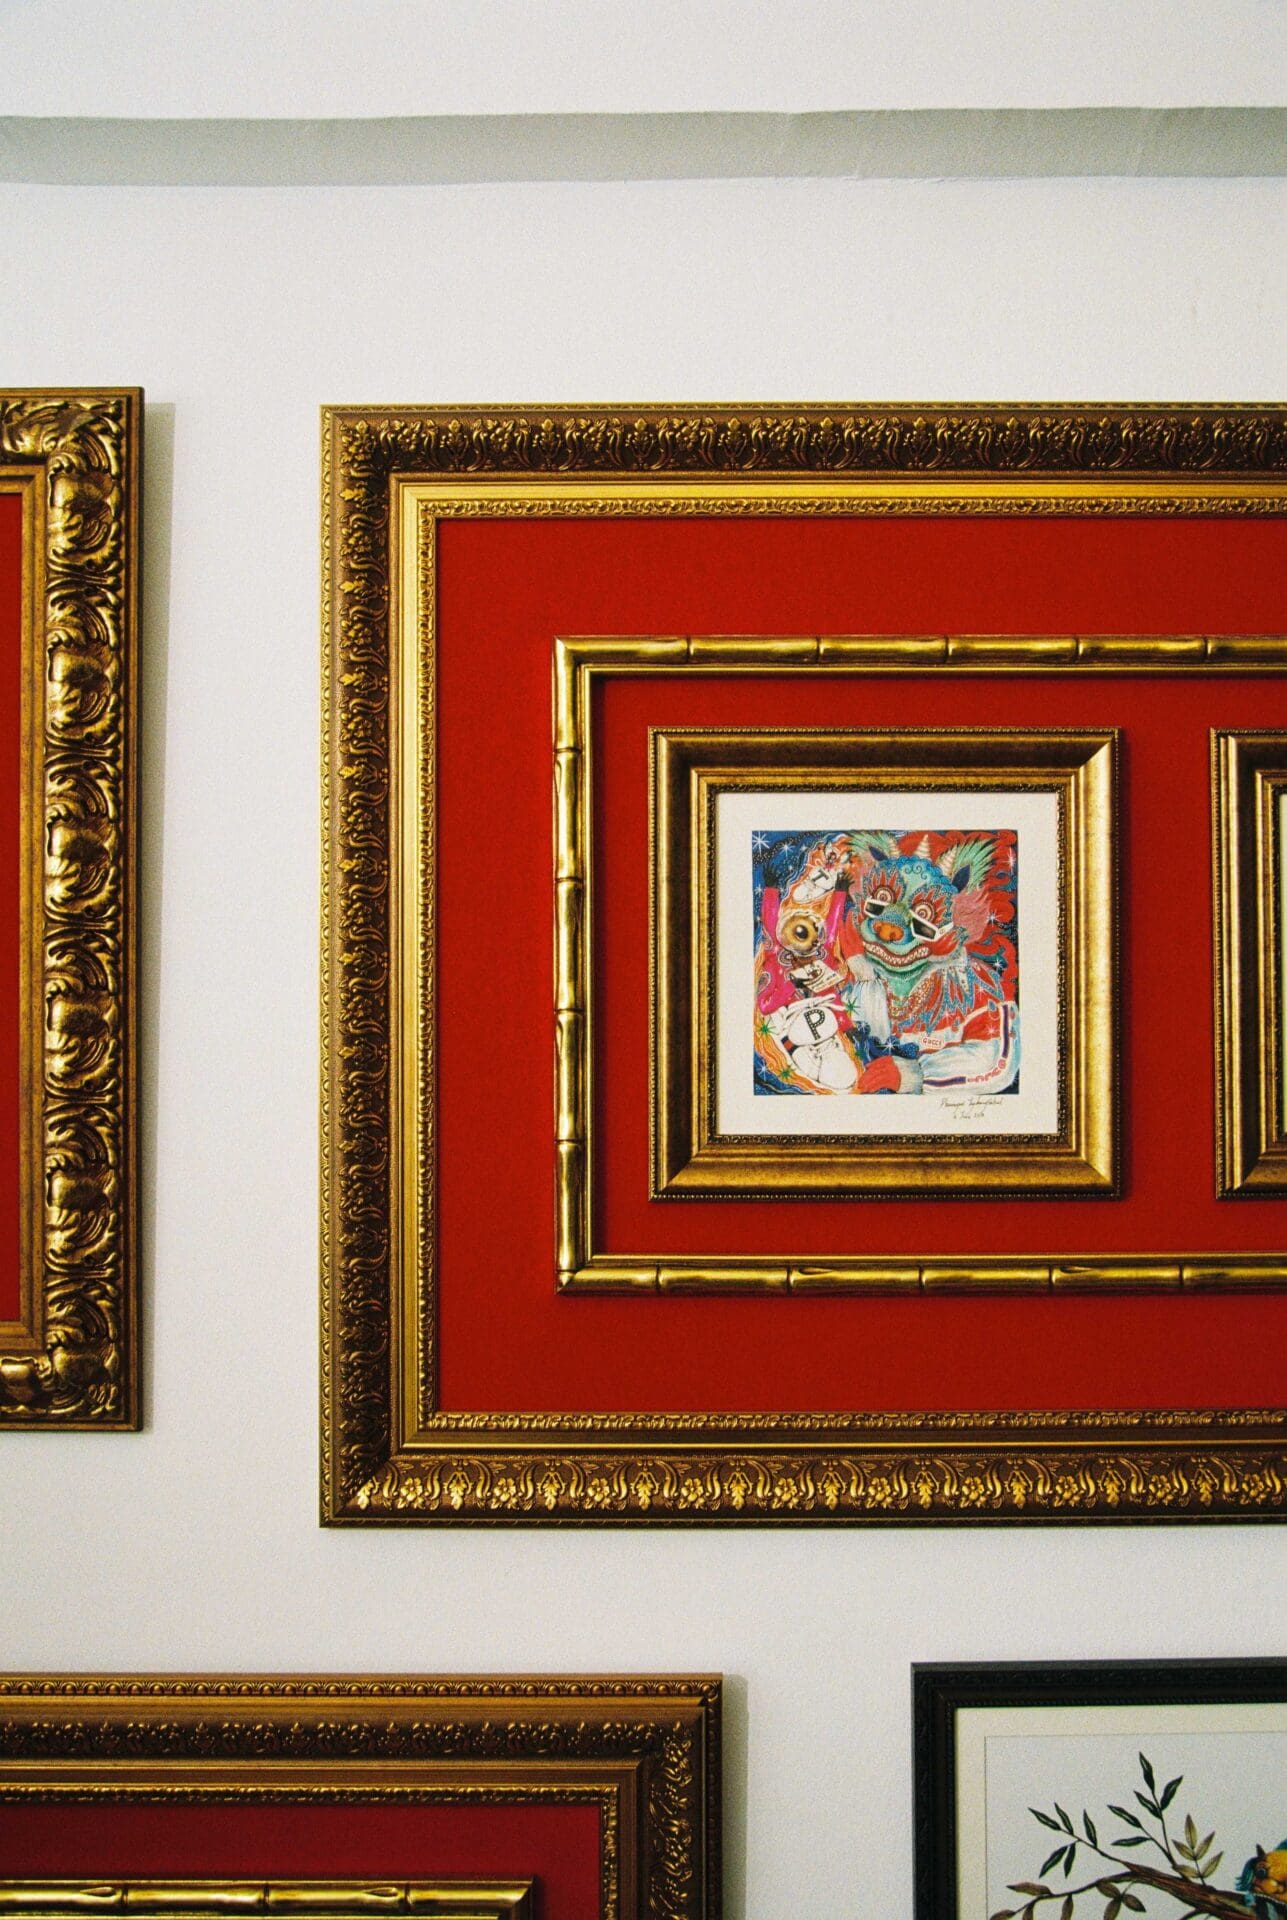 Phannapast | A small, square colourful painting sits on a red background inside a gold-edged frame, hung on a white wall